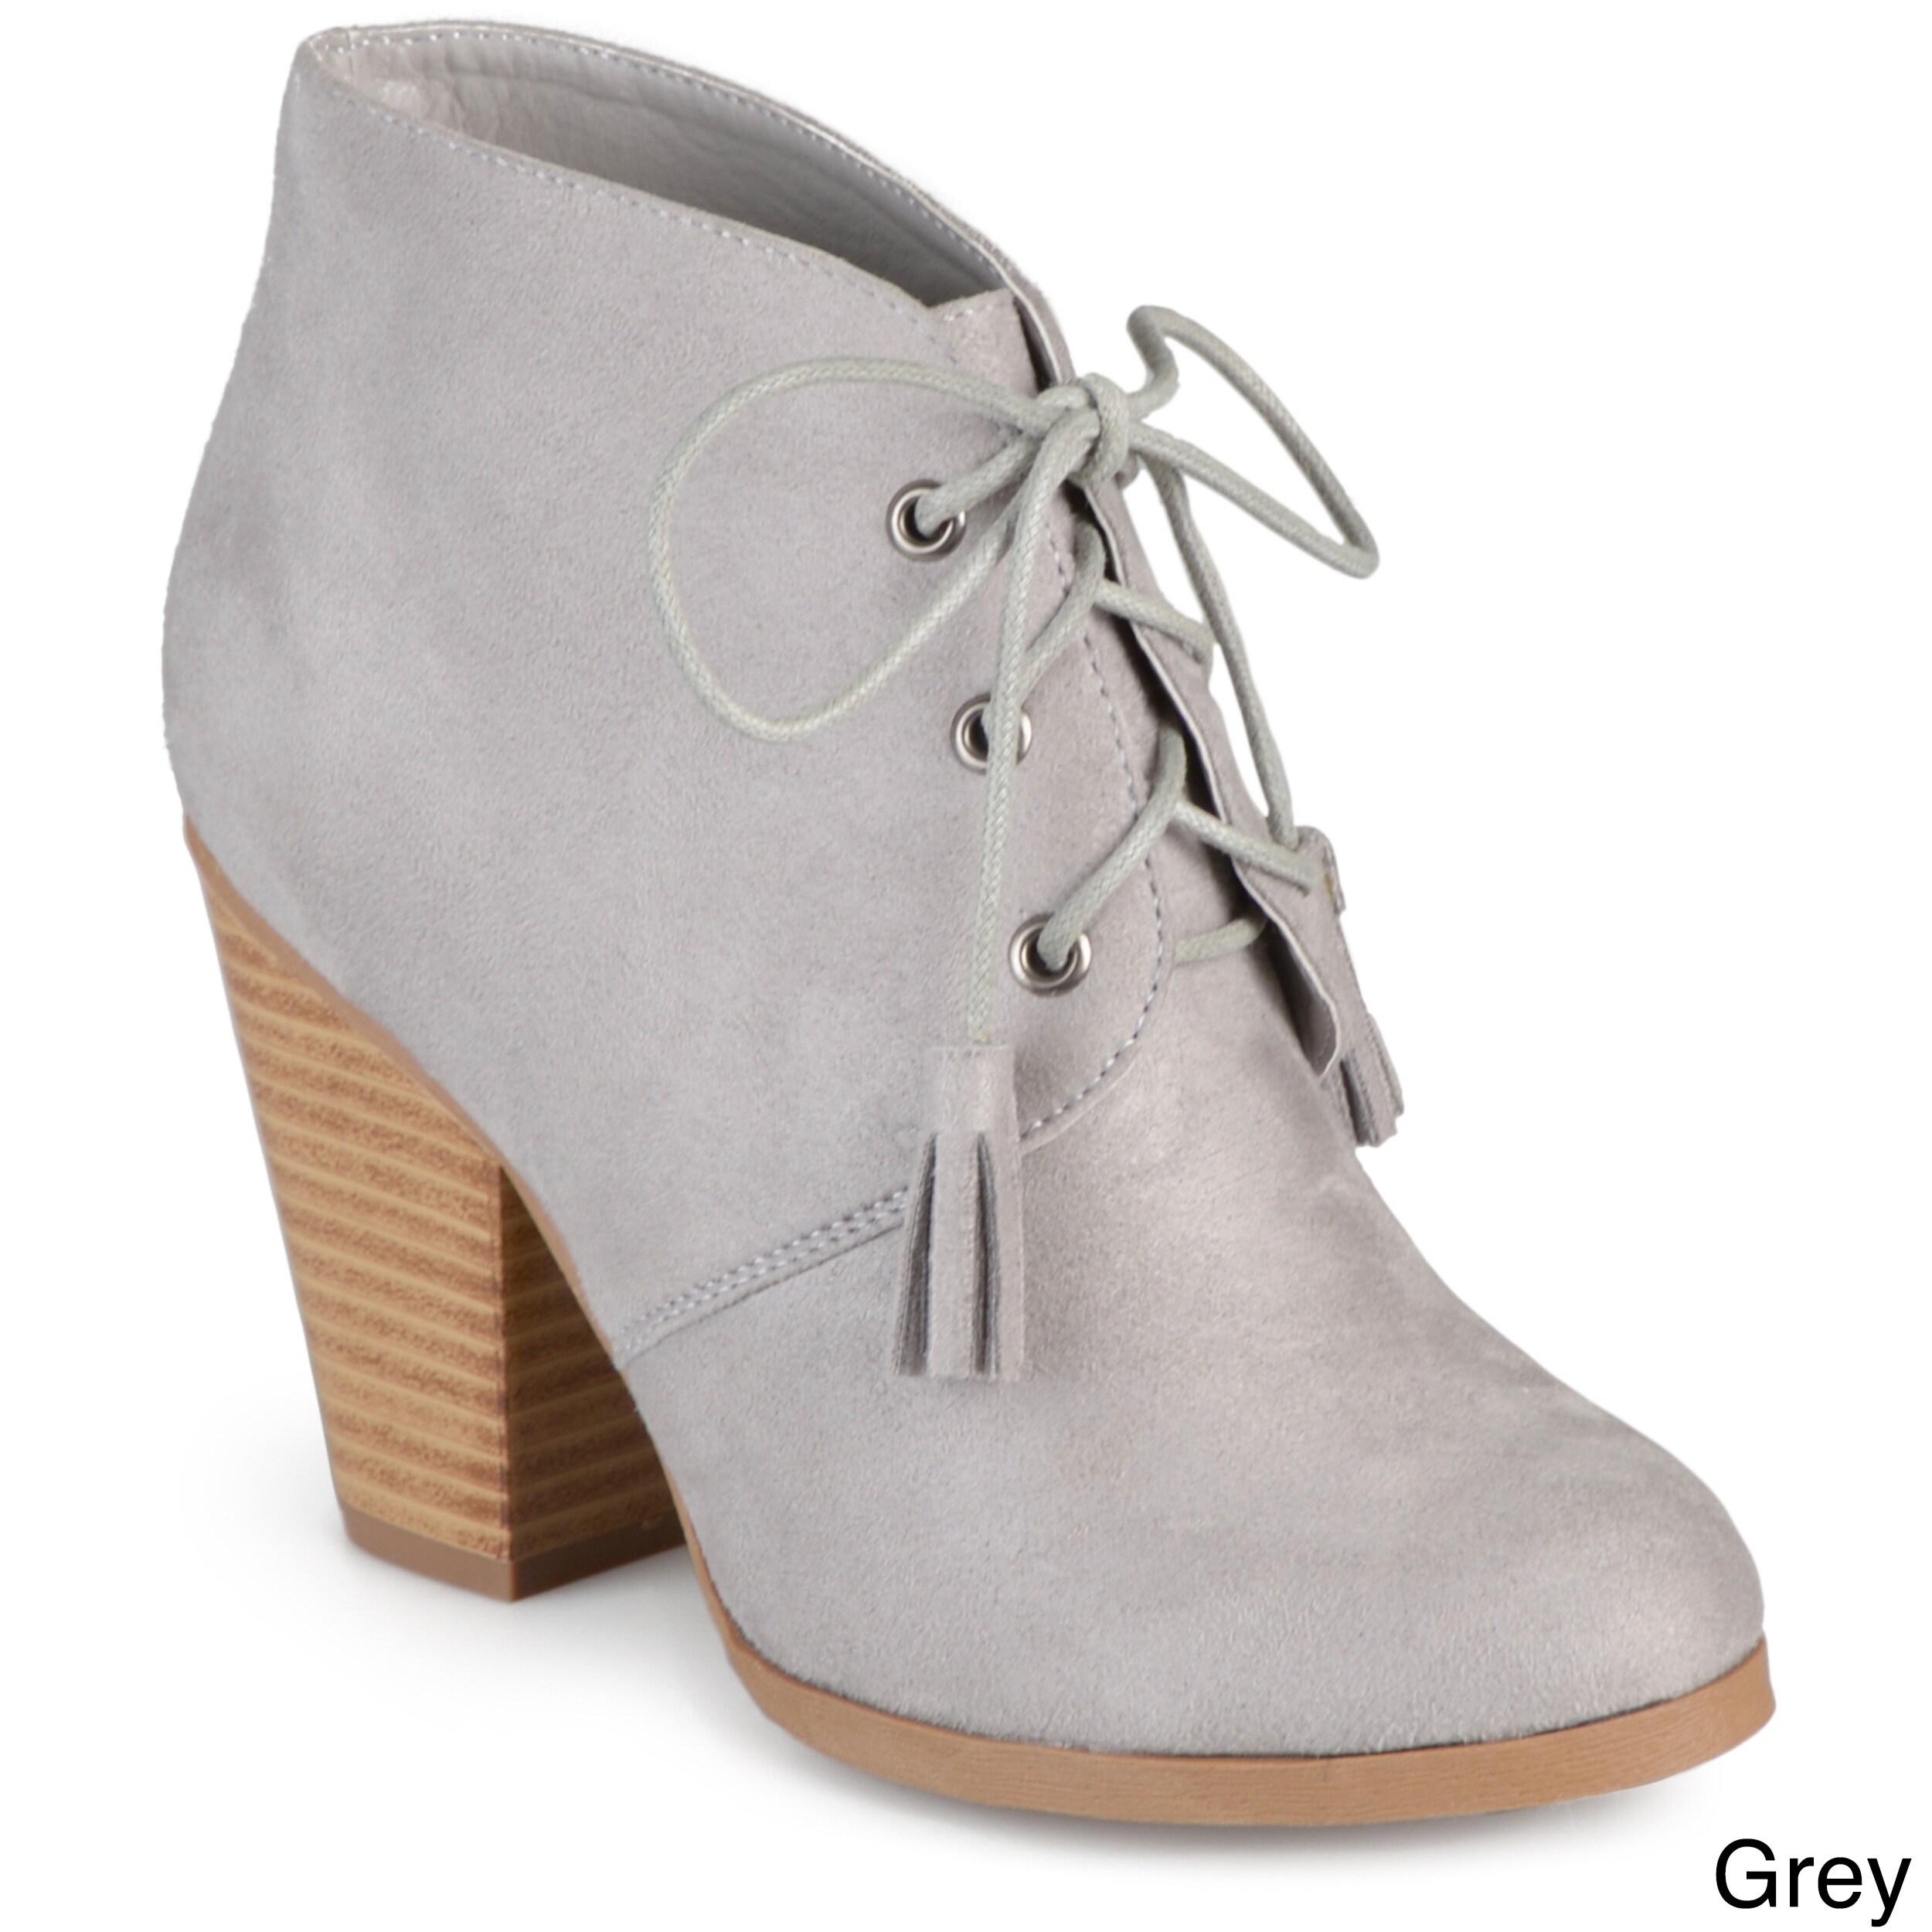 journee lace up boots